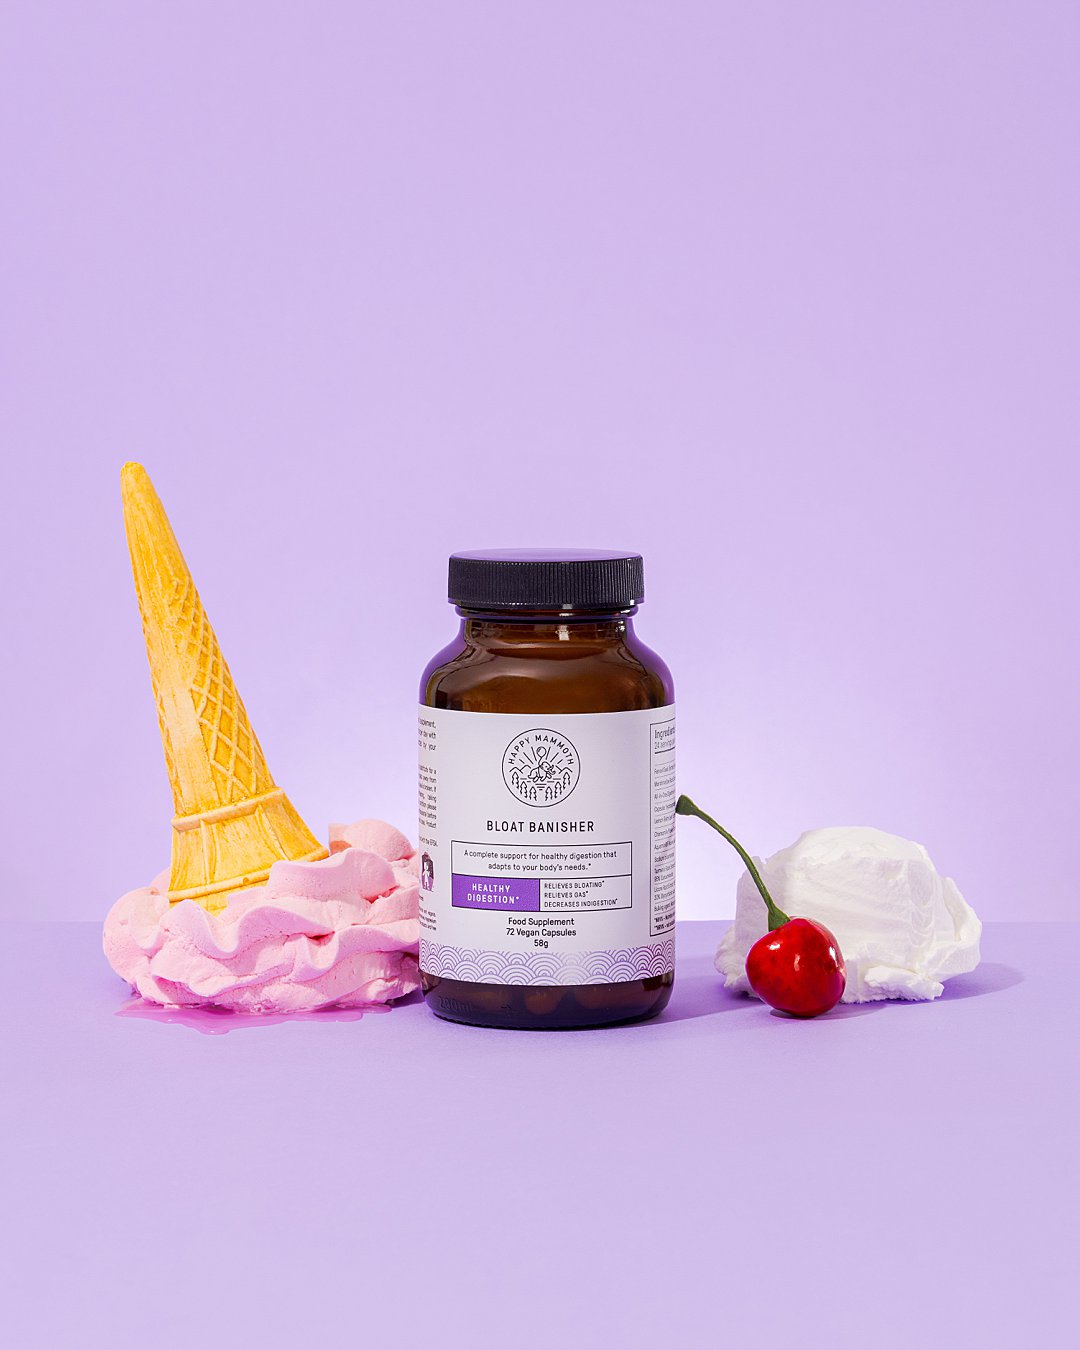 Colourful content creation for The Happy Mammoth. Styled supplement and vitamin product still life photography by HIYA MARIANNE photo production studio.